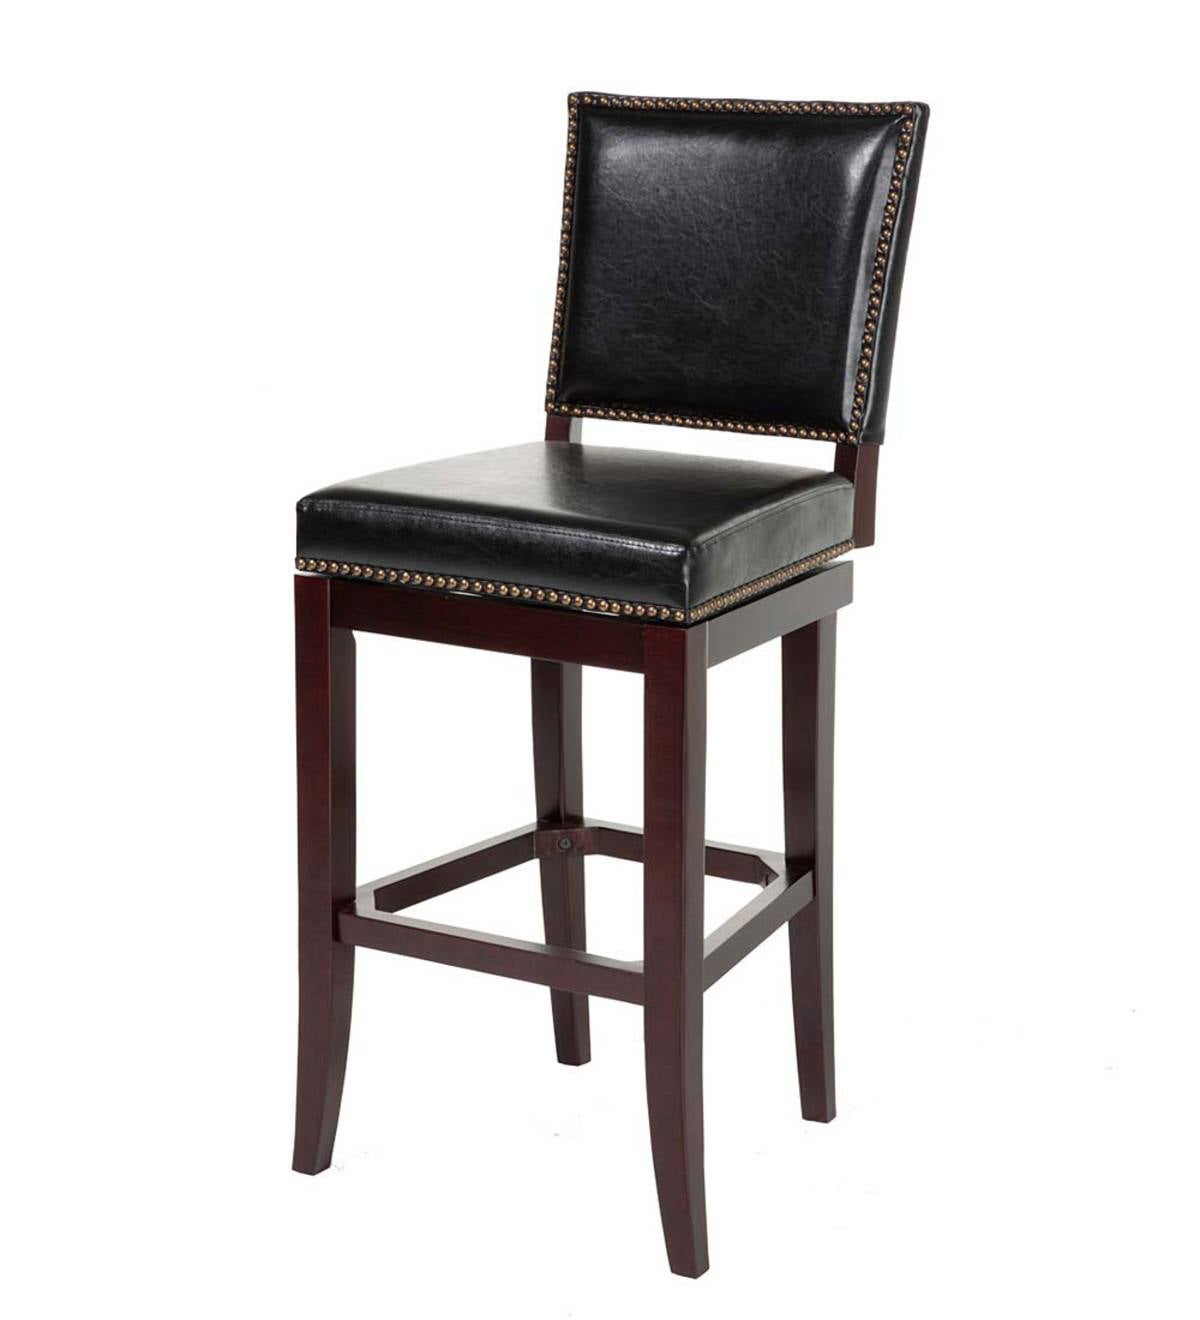 Faux Leather-Upholstered Tyson Bar Stool